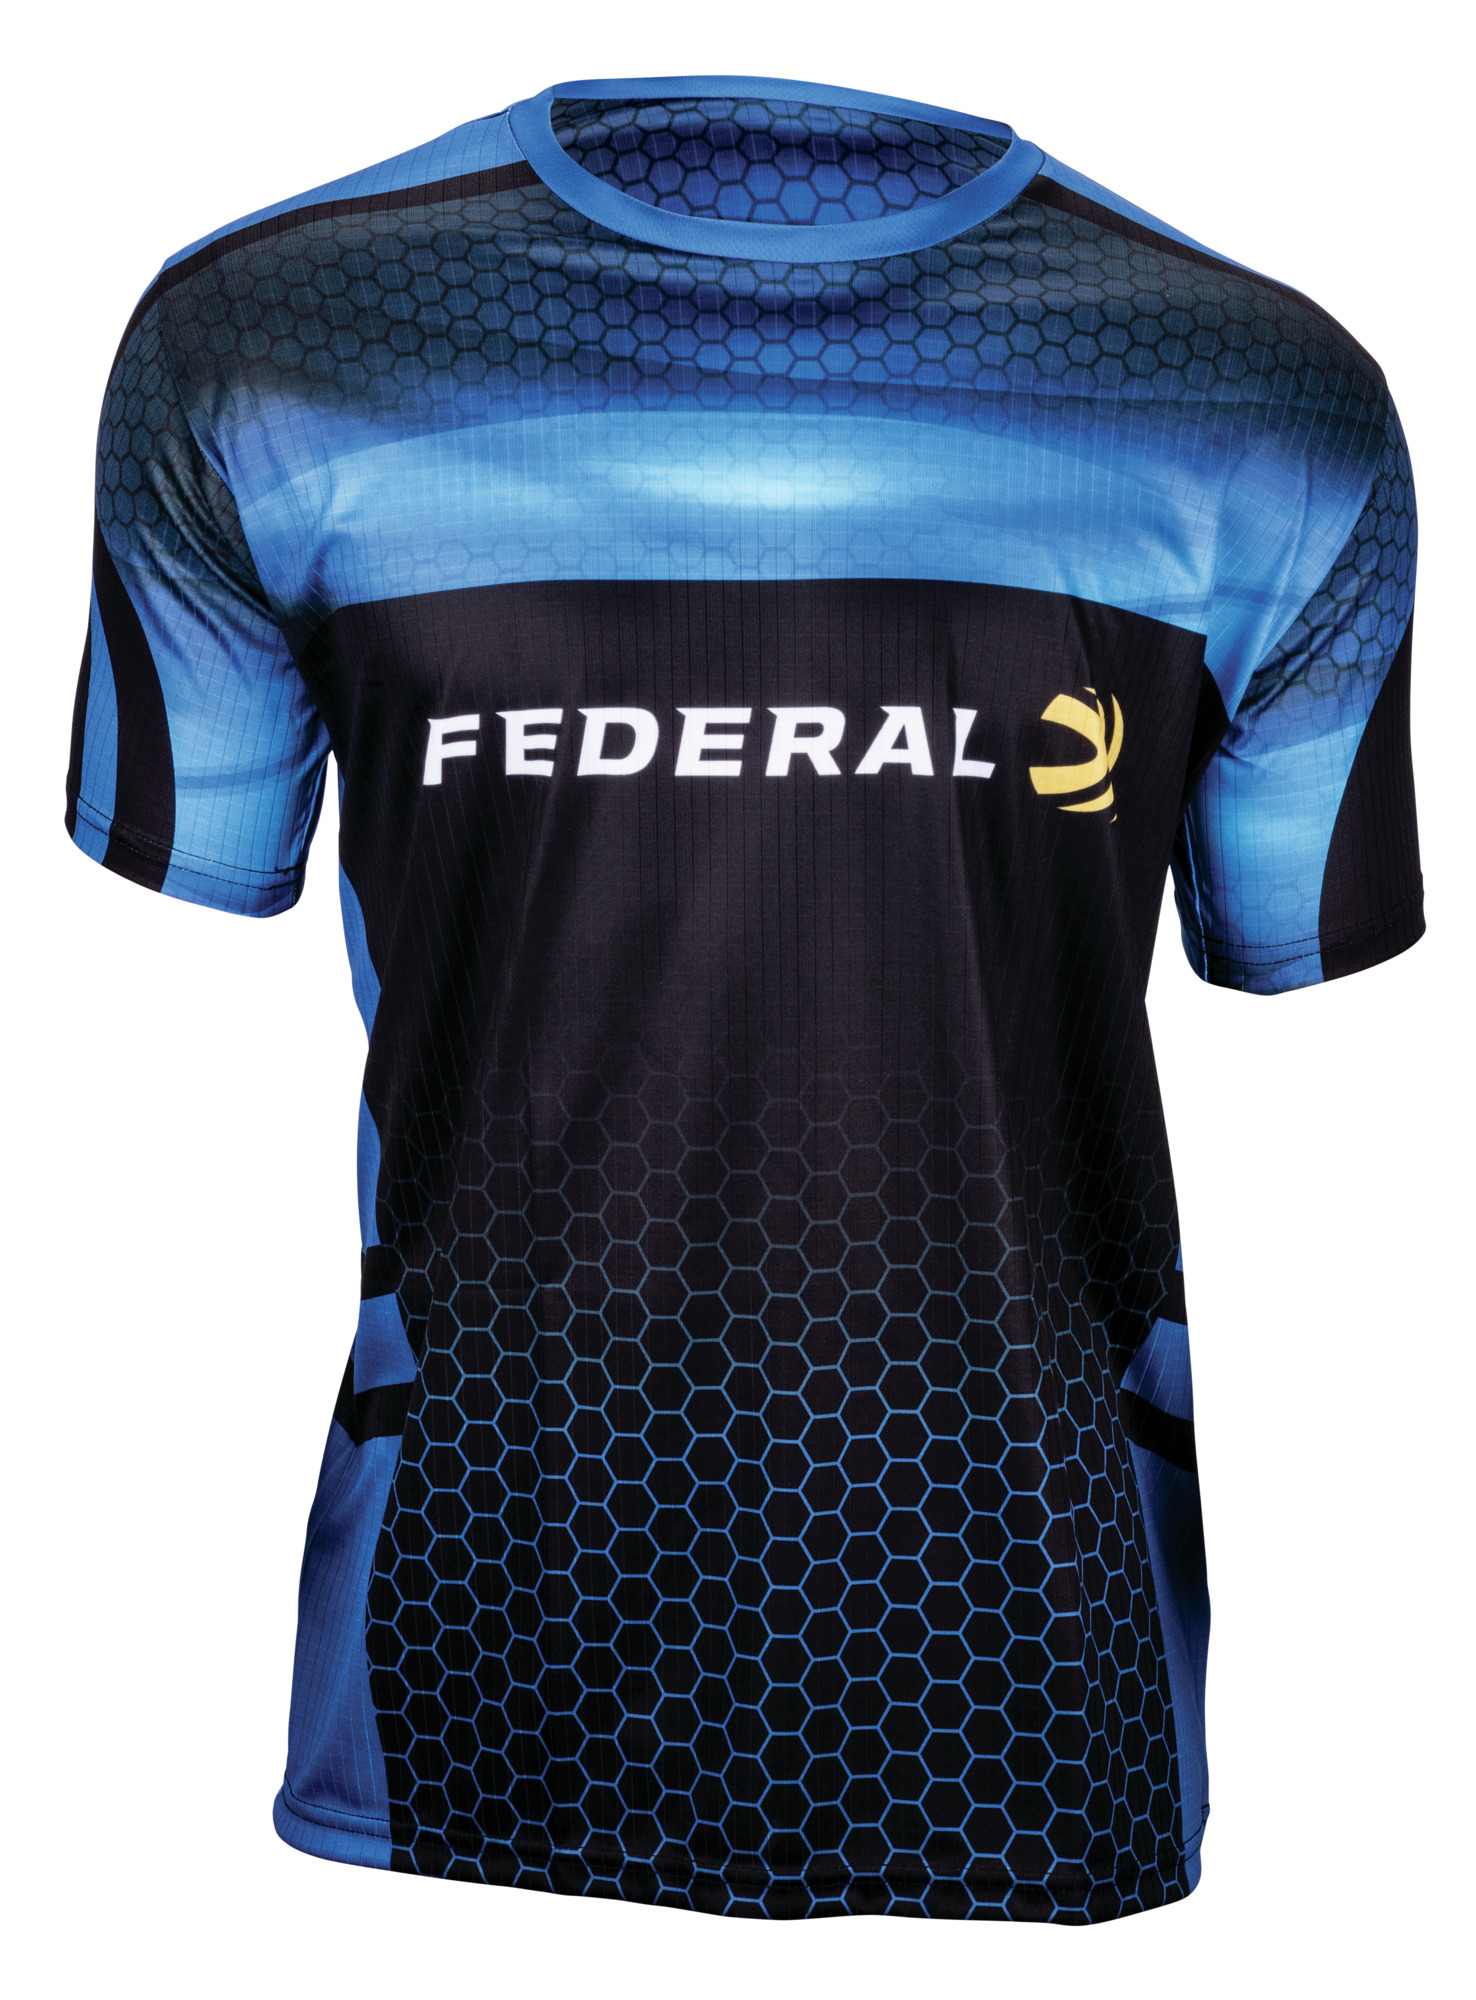 Buy Federal Shooting Jersey for USD 54.99-54.99 Federal Ammunition